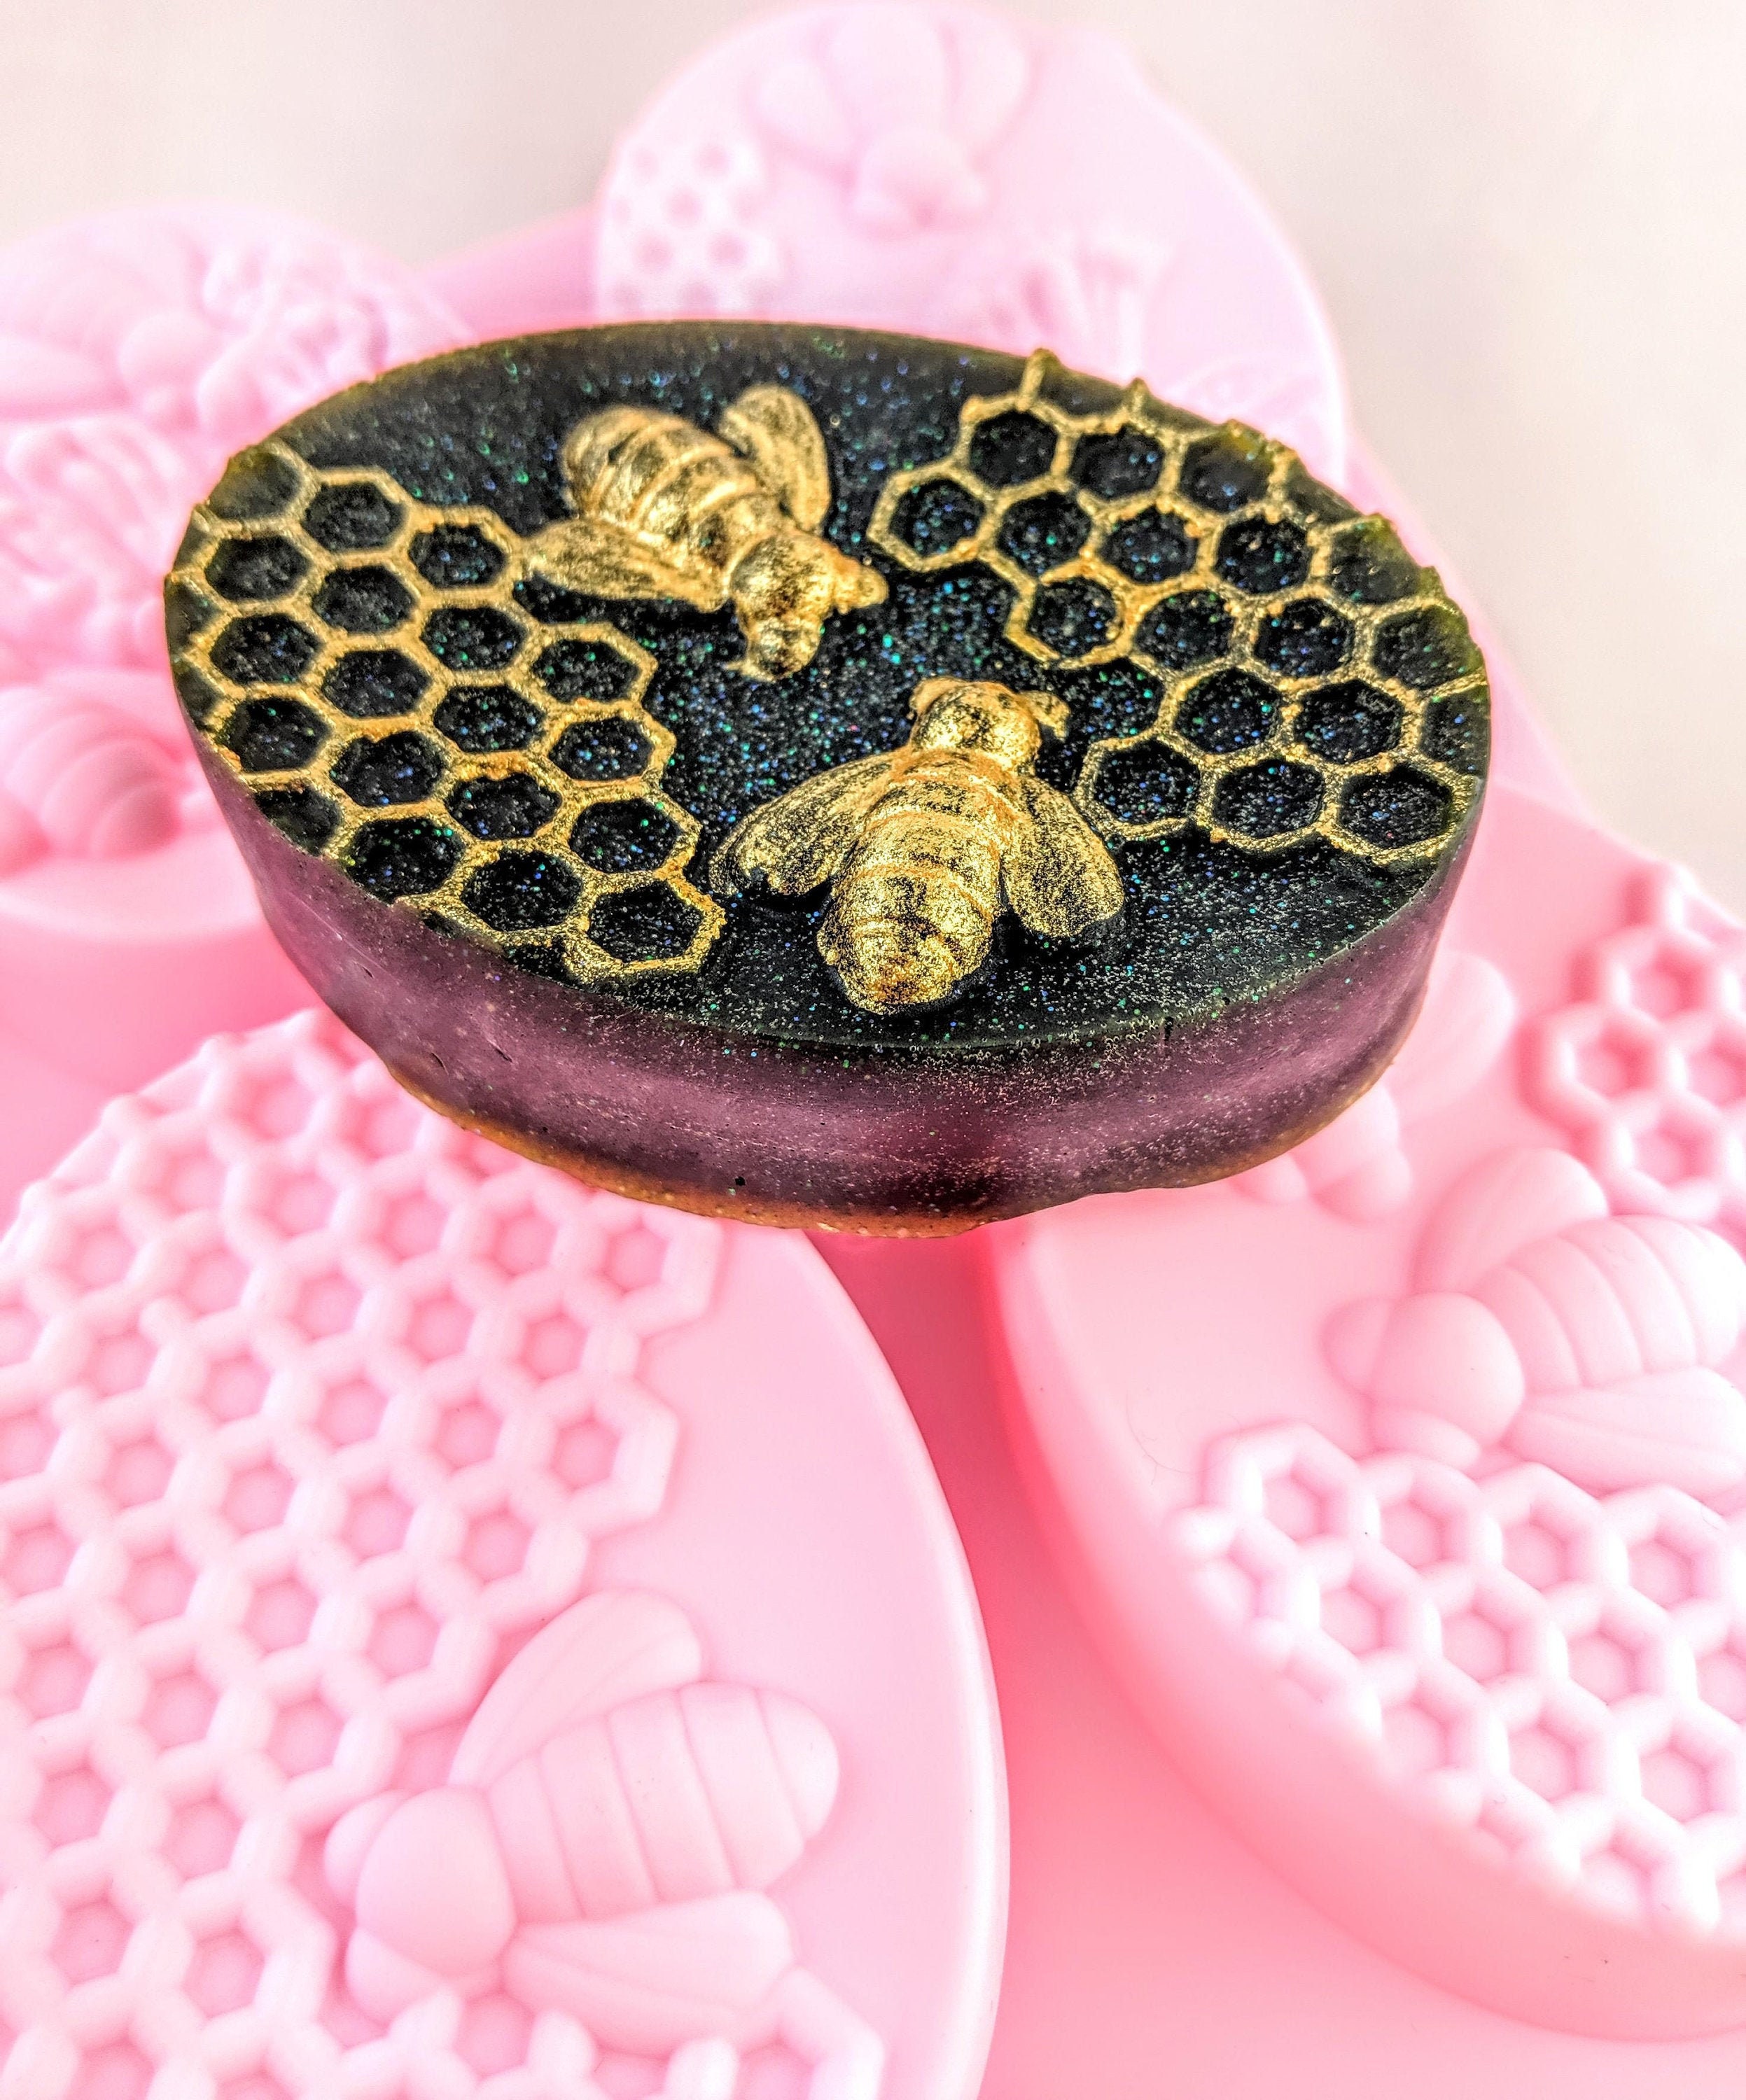 Honeycomb / bee mold- flexible silicone push mold / craft/ dessert/ mini  food / resin/jewelry and more..